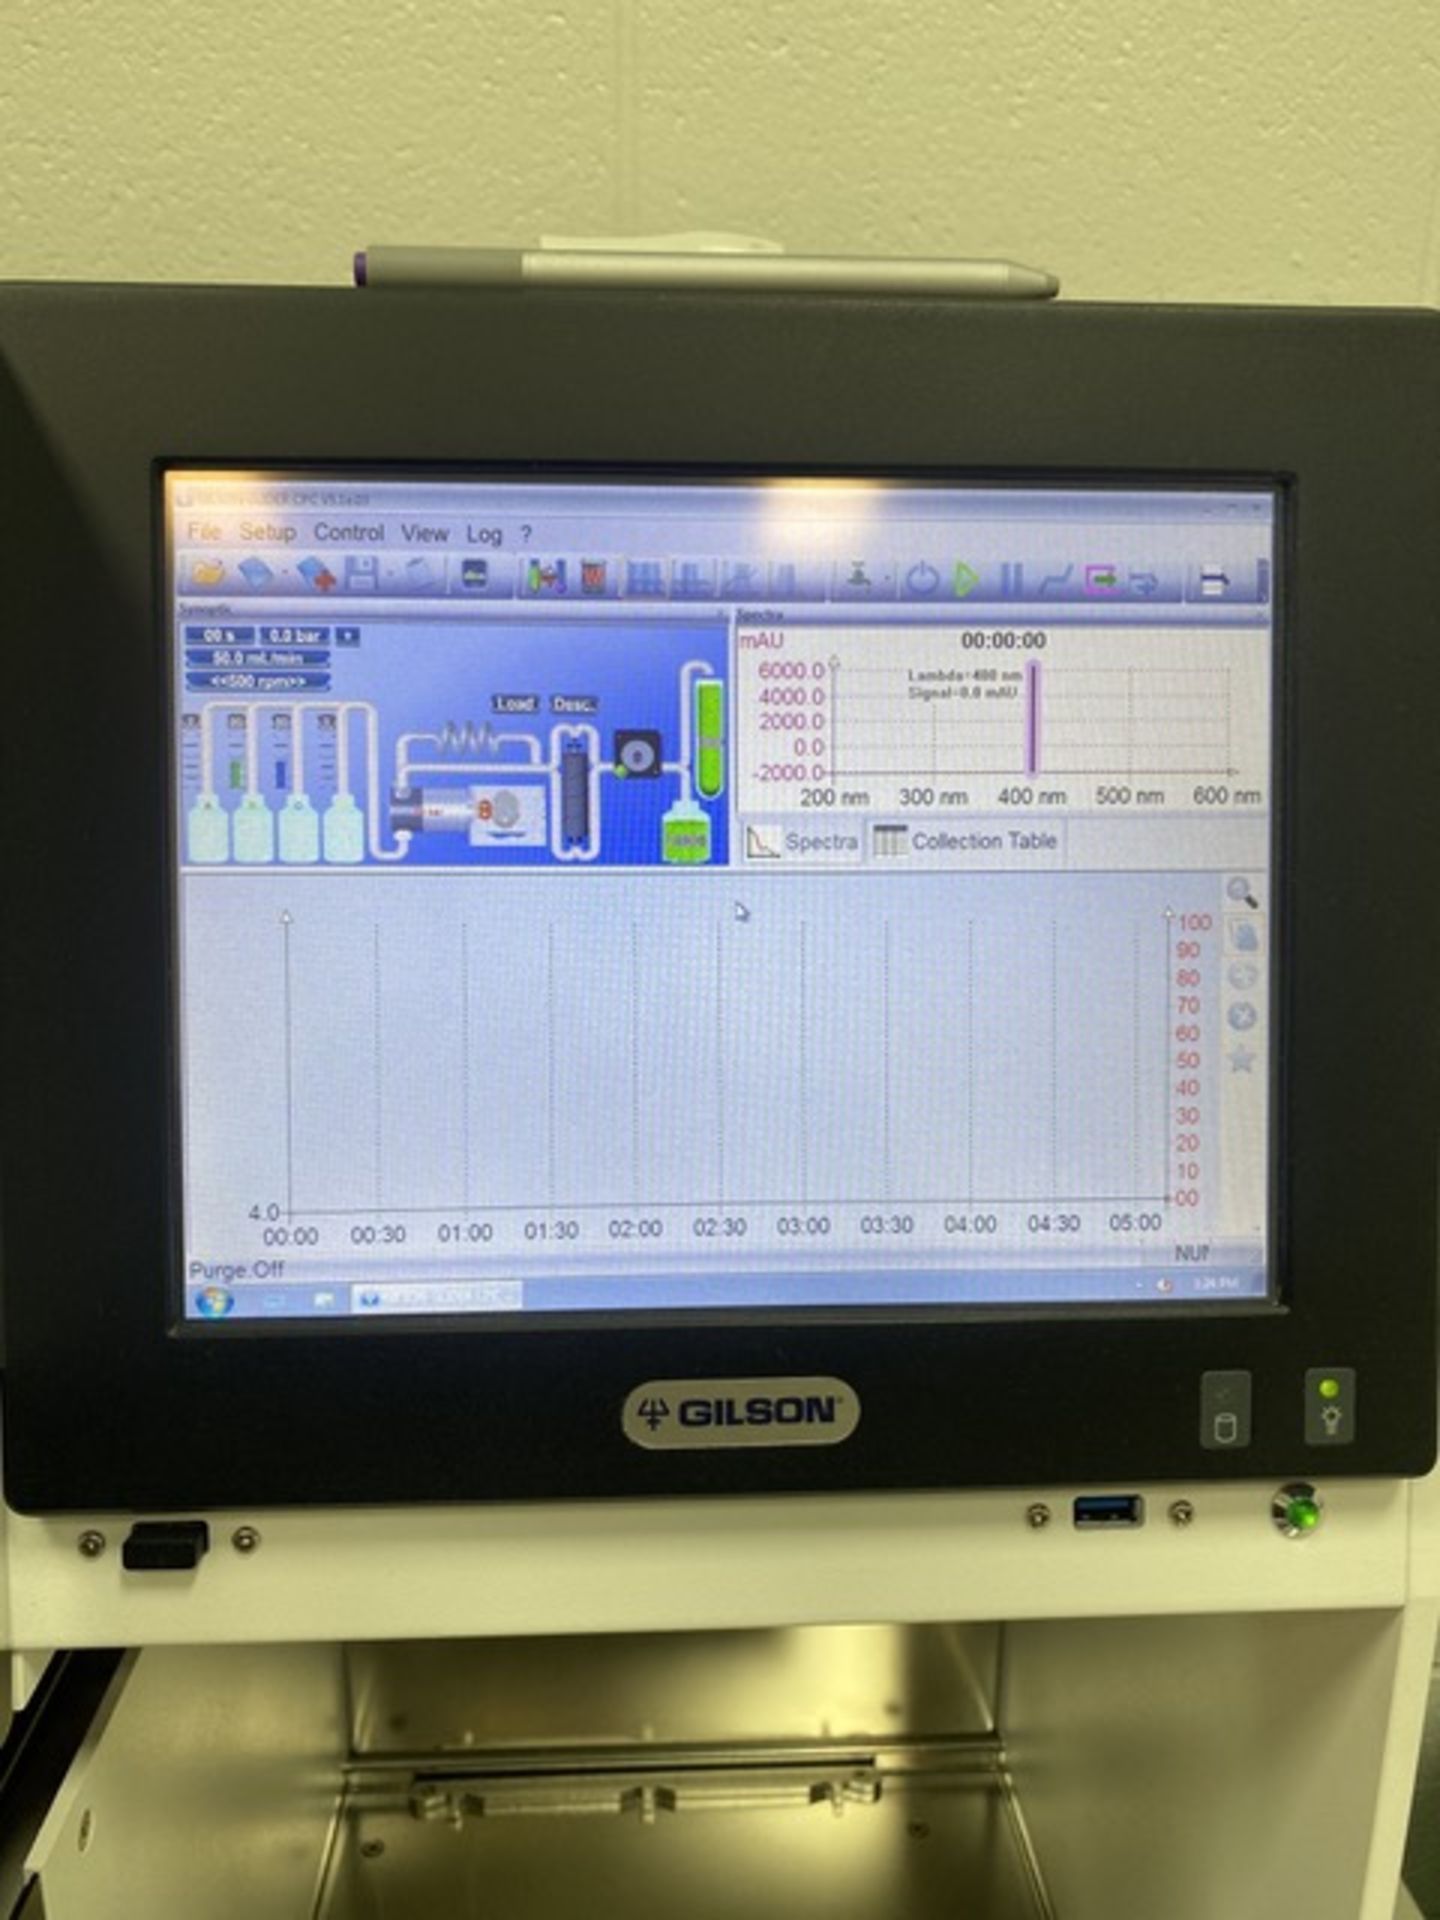 Used Gilson HPLC Set Up Including PLC 2500 UV 1 & CPC 1000 PRO + Much More - Image 5 of 8